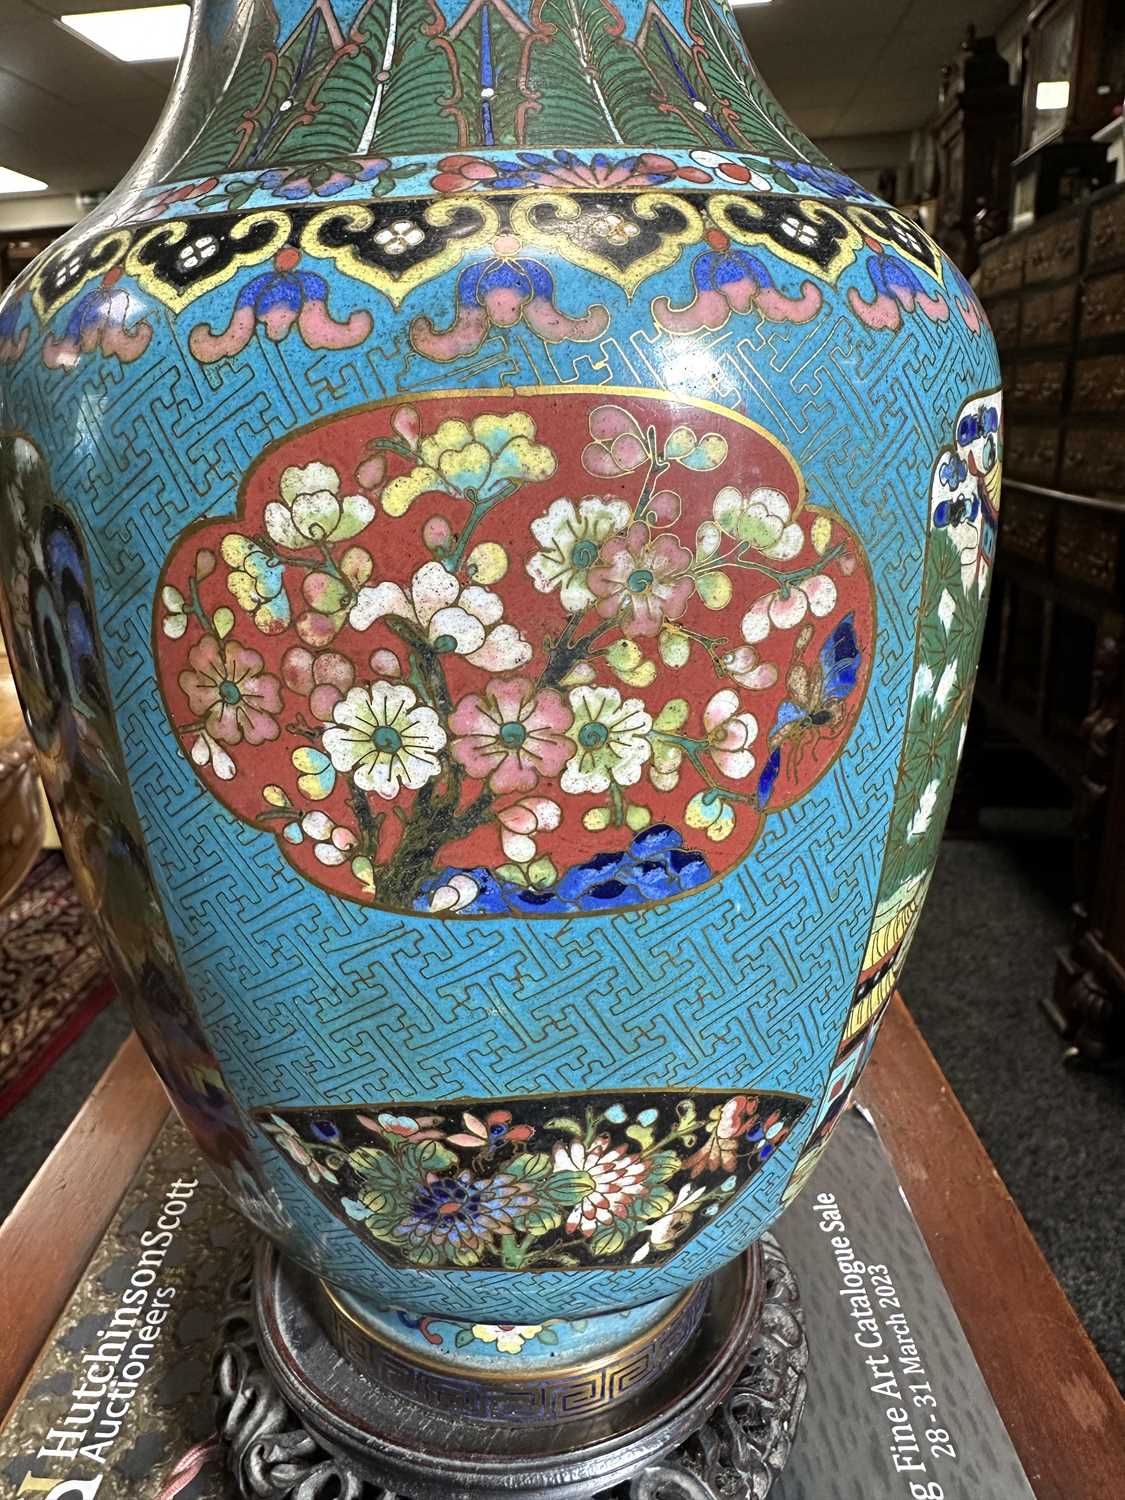 A LATE 19TH/EARLY 20TH CENTURY CENTURY CHINESE CLOISONNE VASE LAMP - Image 22 of 34